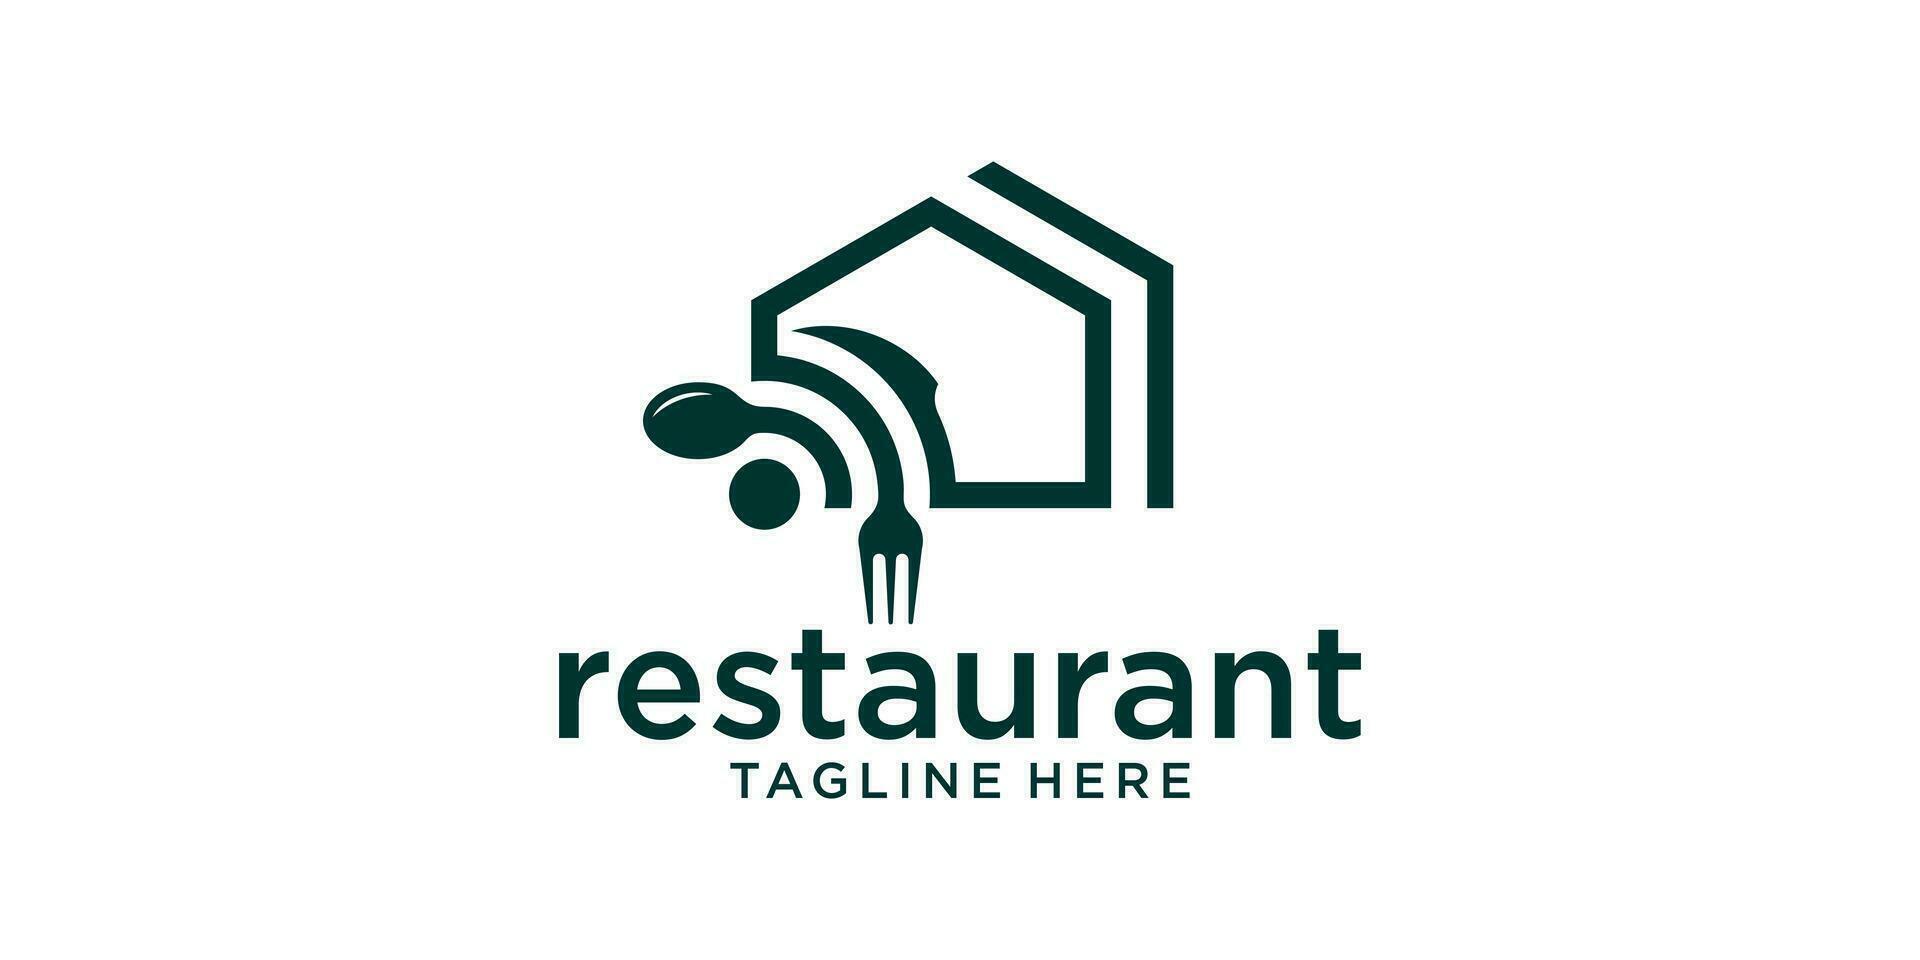 restaurant logo design with elements combining the shape of a house, internet signal and cutlery. vector